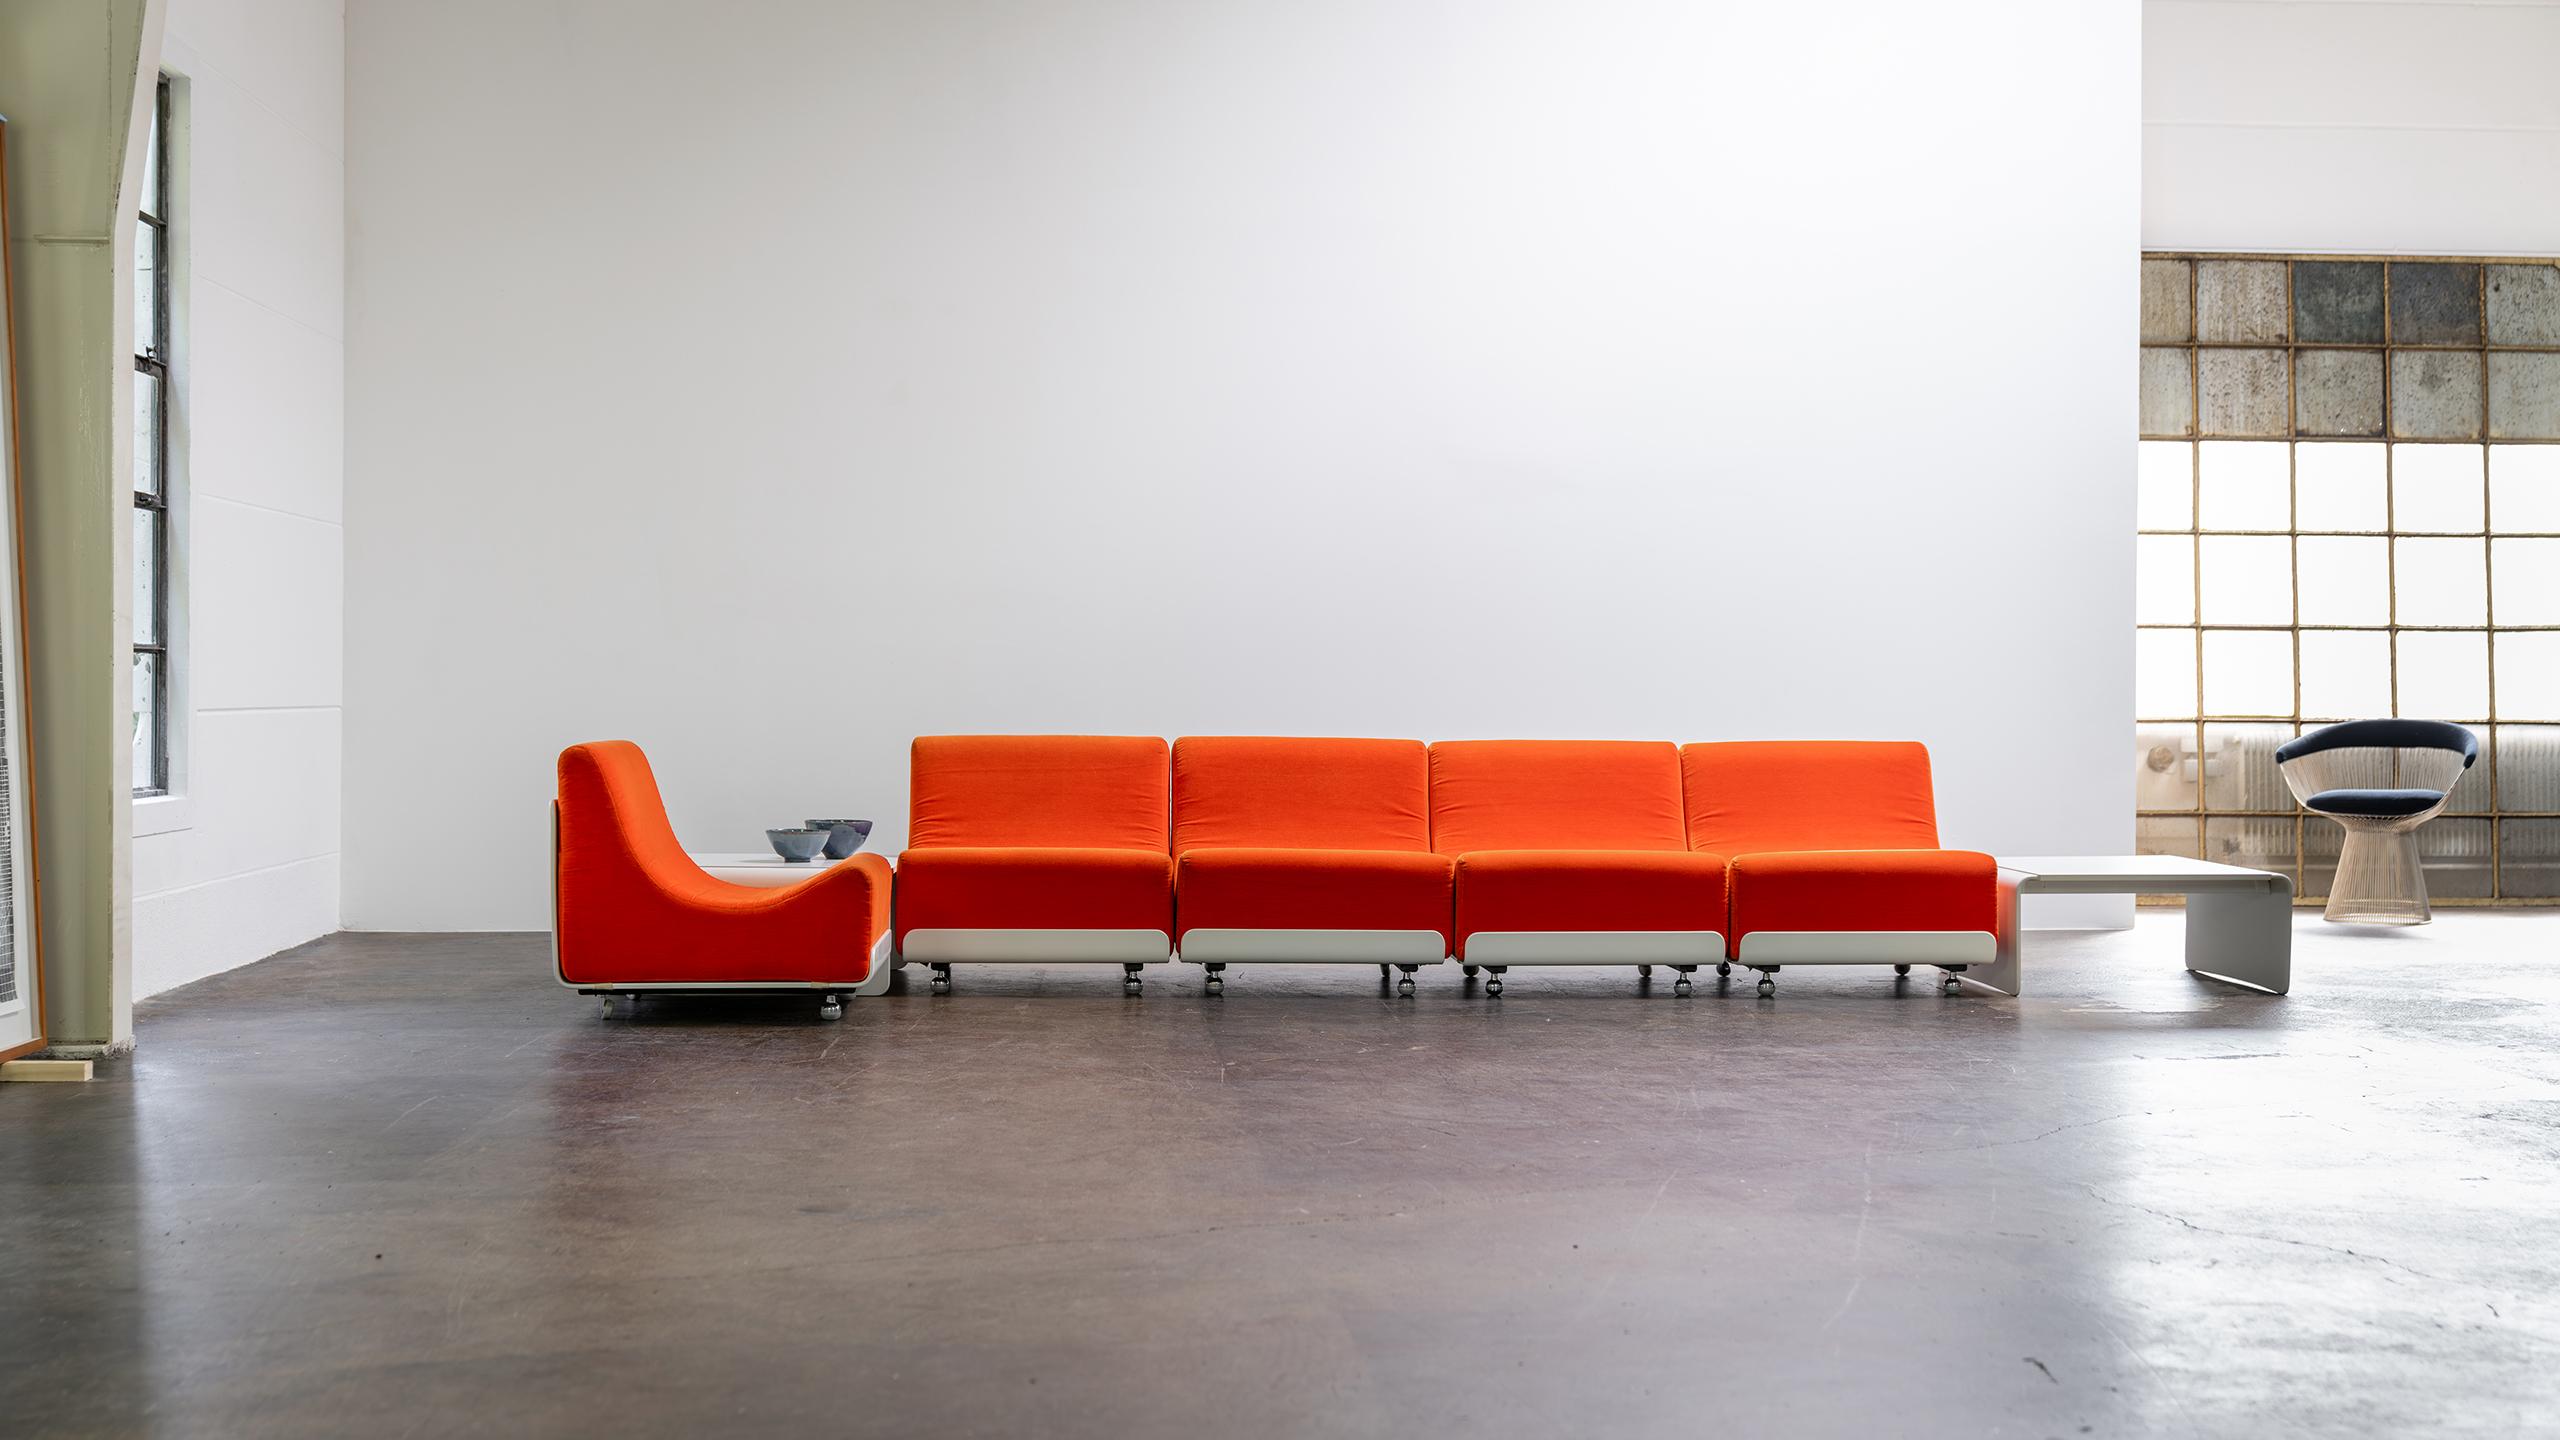 Luigi Colani, 1969 for COR, Germany - modular Orbis sofa with original orange-red needle velvet. 
The fabric has a very pleasant feel, get an impression from the detail photos.

The set consists of 5 seat elements (the inlay cushions are present,